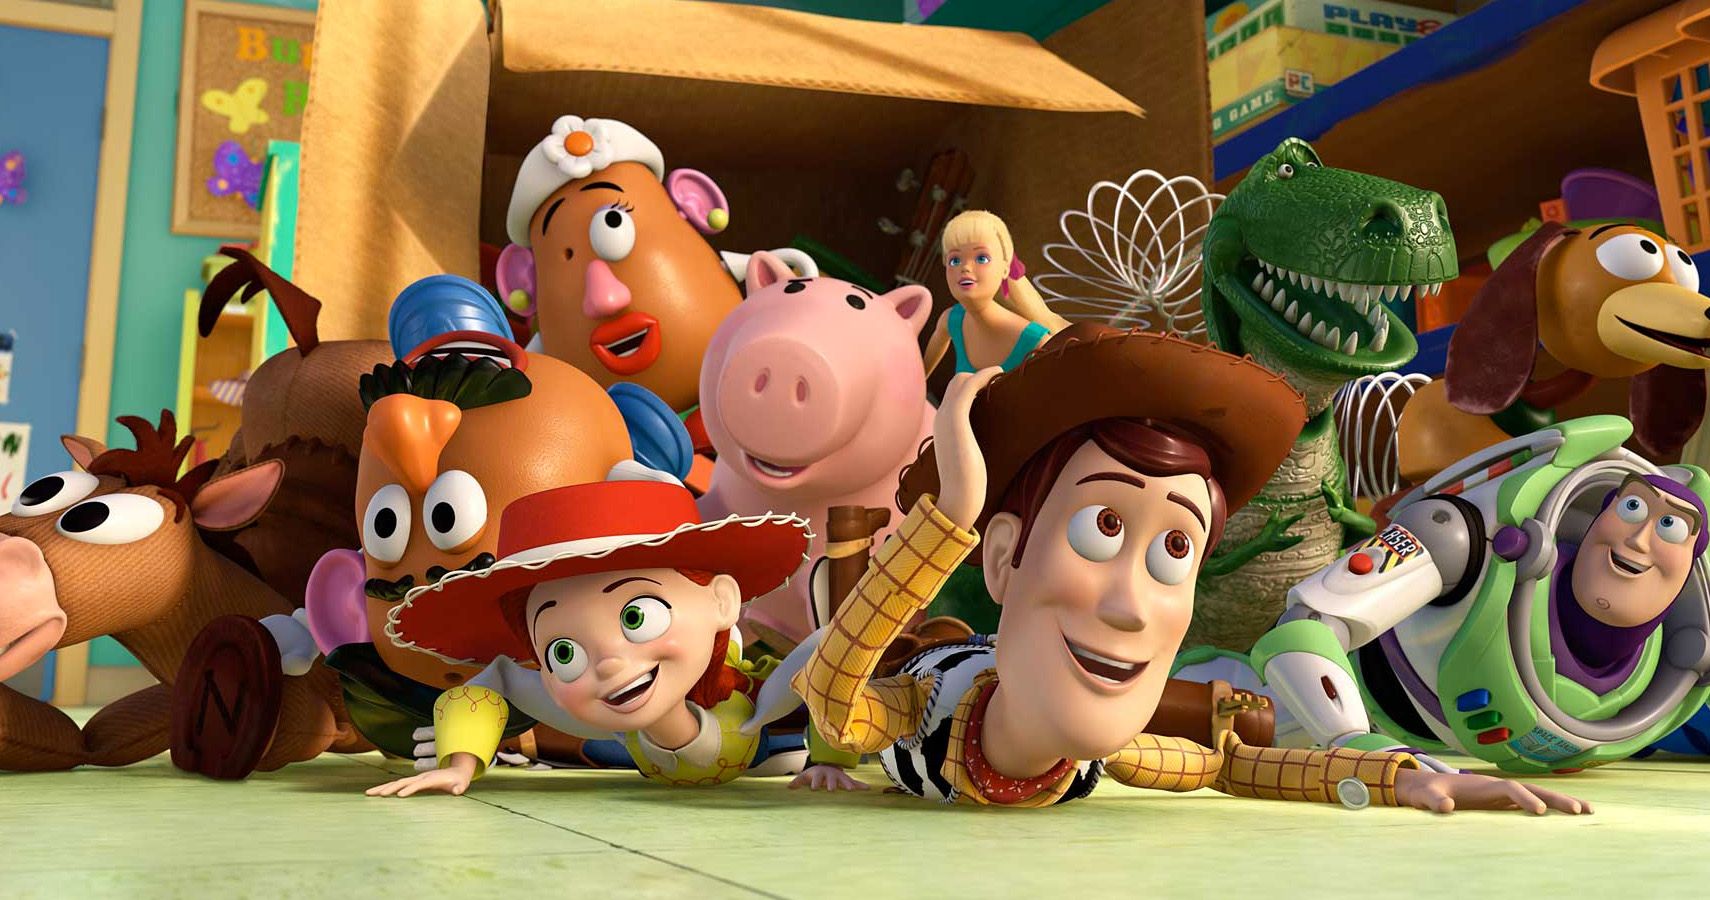 main toy story characters